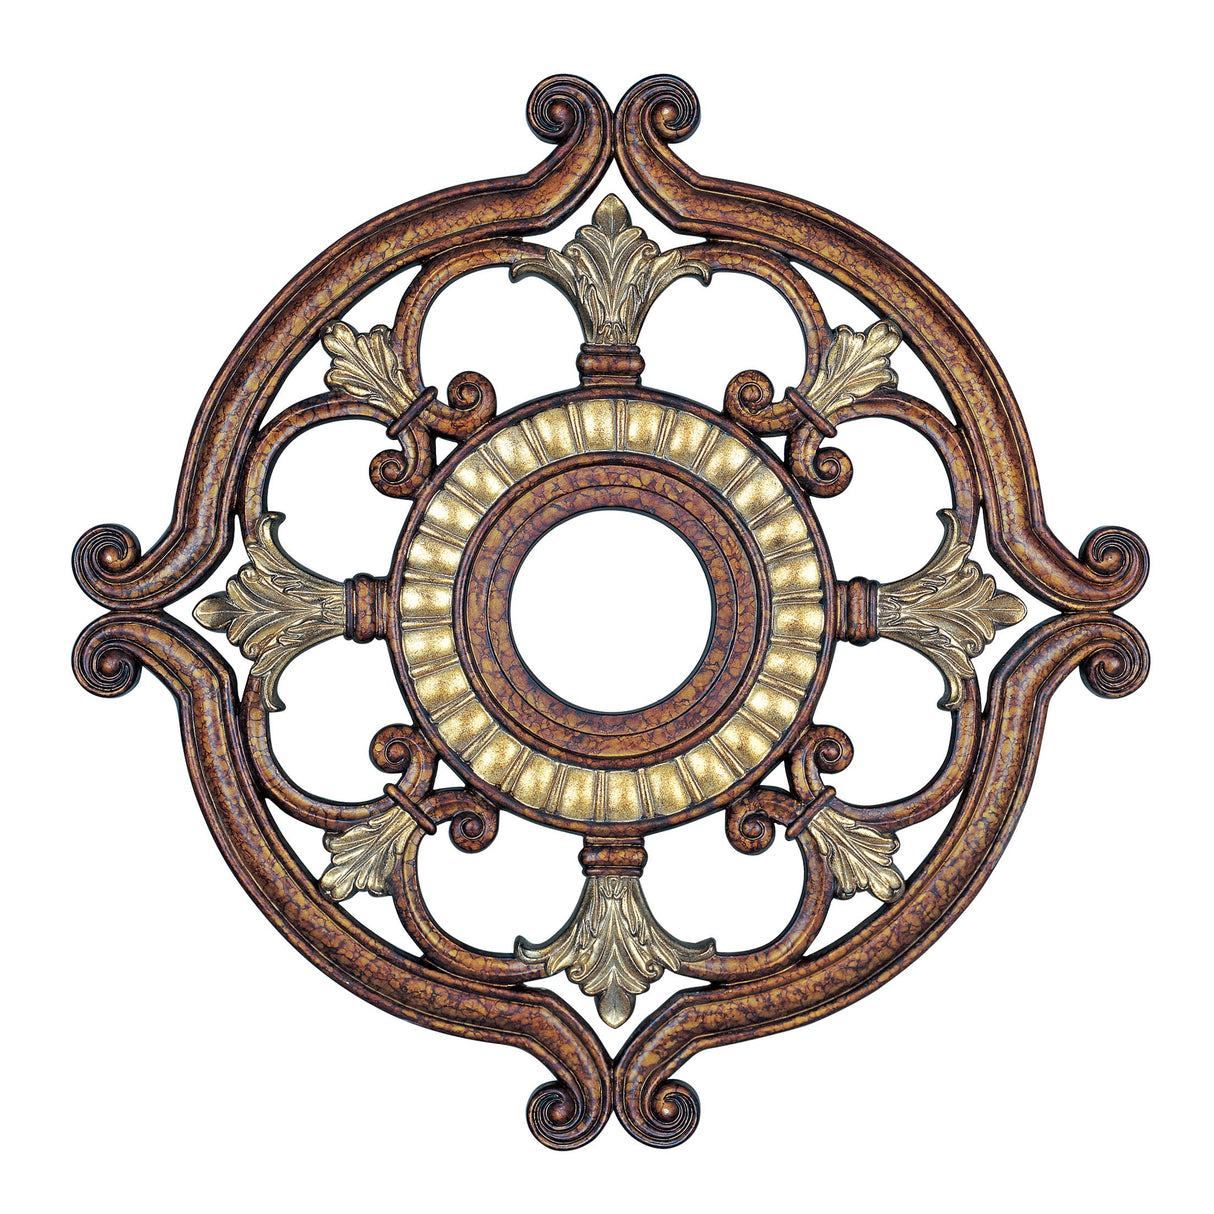 Livex Lighting 8216-64 Ceiling Medallion in Palacial Bronze with Gilded Accents, 0.1 x 0.1 x 1.5